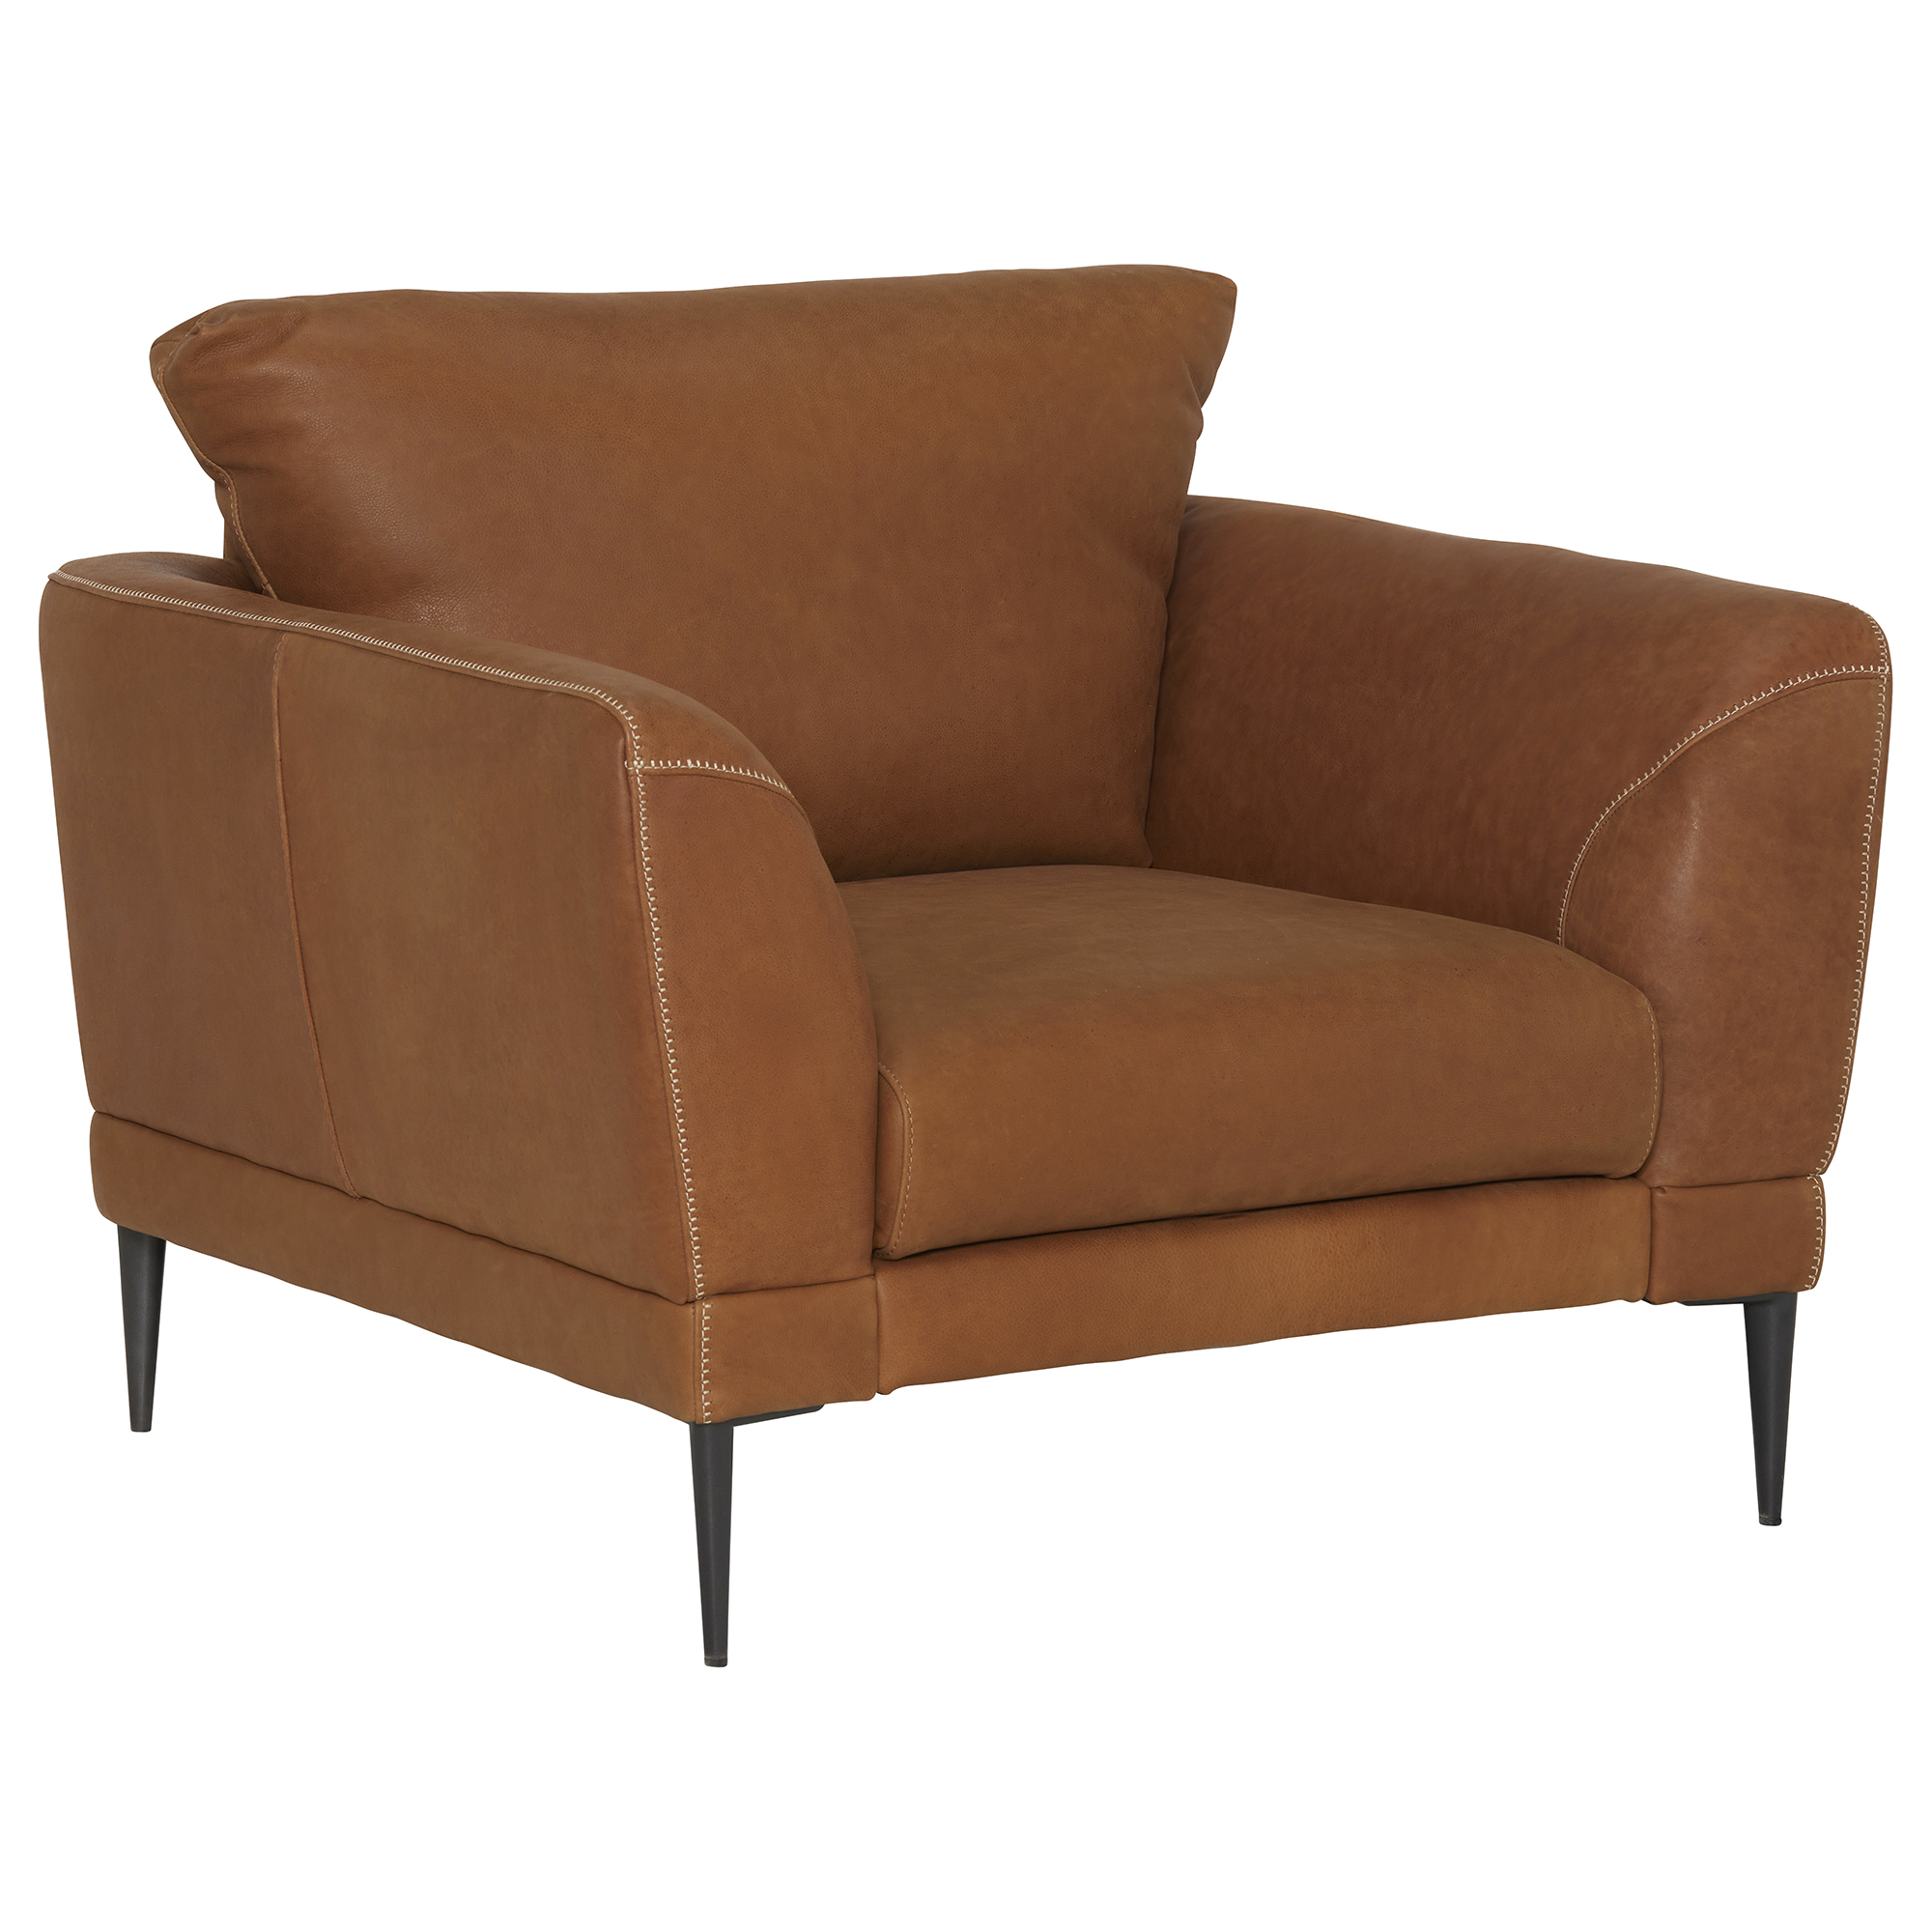 Tennessee Armchair, Brown Leather | Barker & Stonehouse